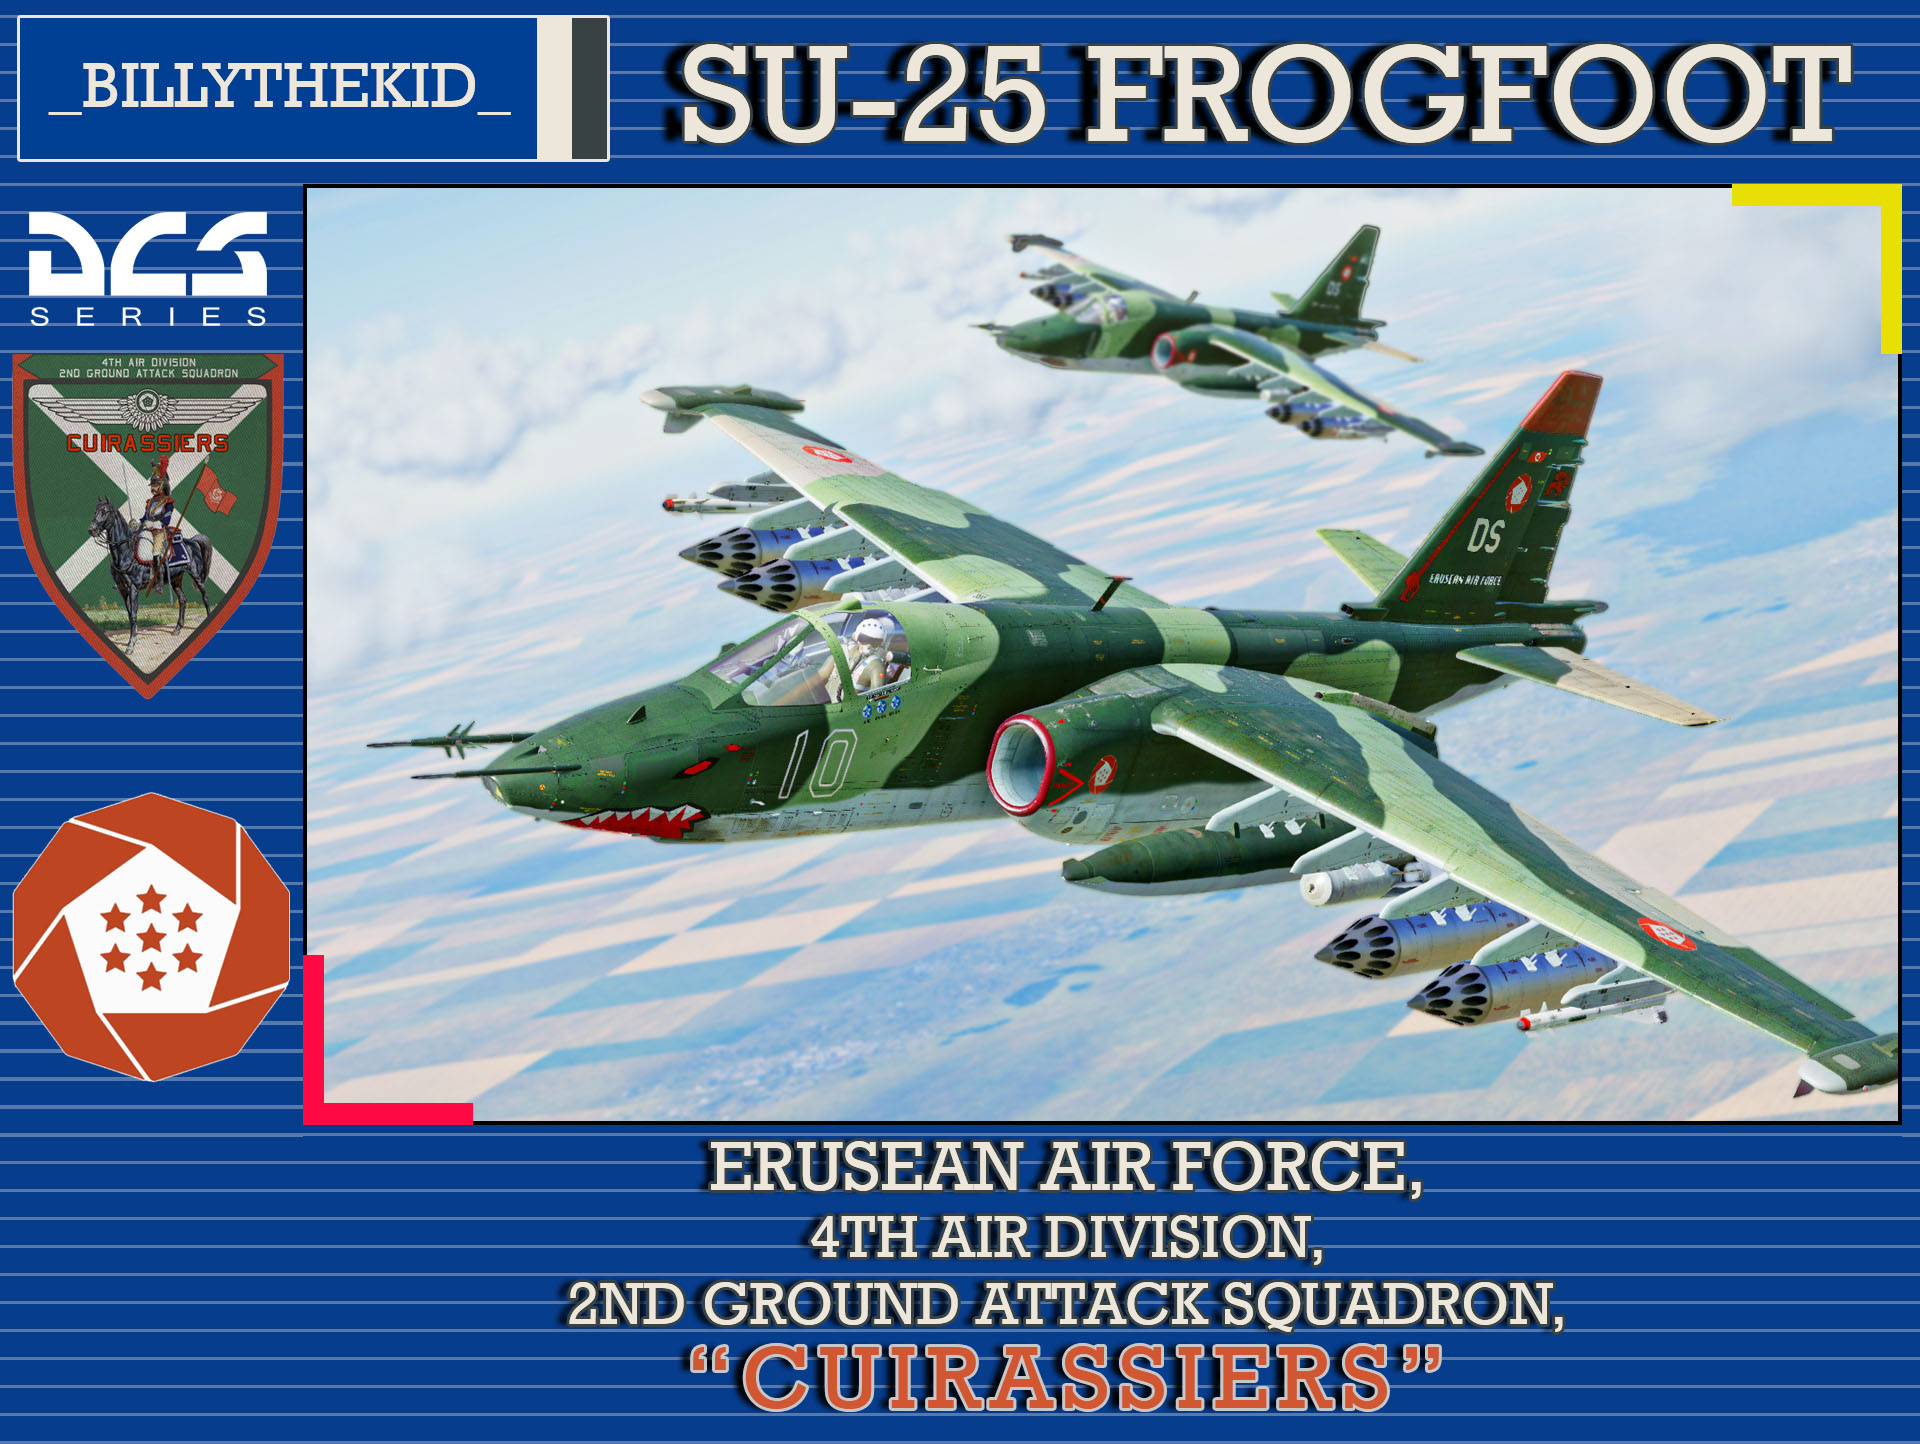 Ace Combat - Erusean Air Force - 4th Air Division - 2nd Ground Attack Squadron "Cuirassiers" SU-25 Frogfoot